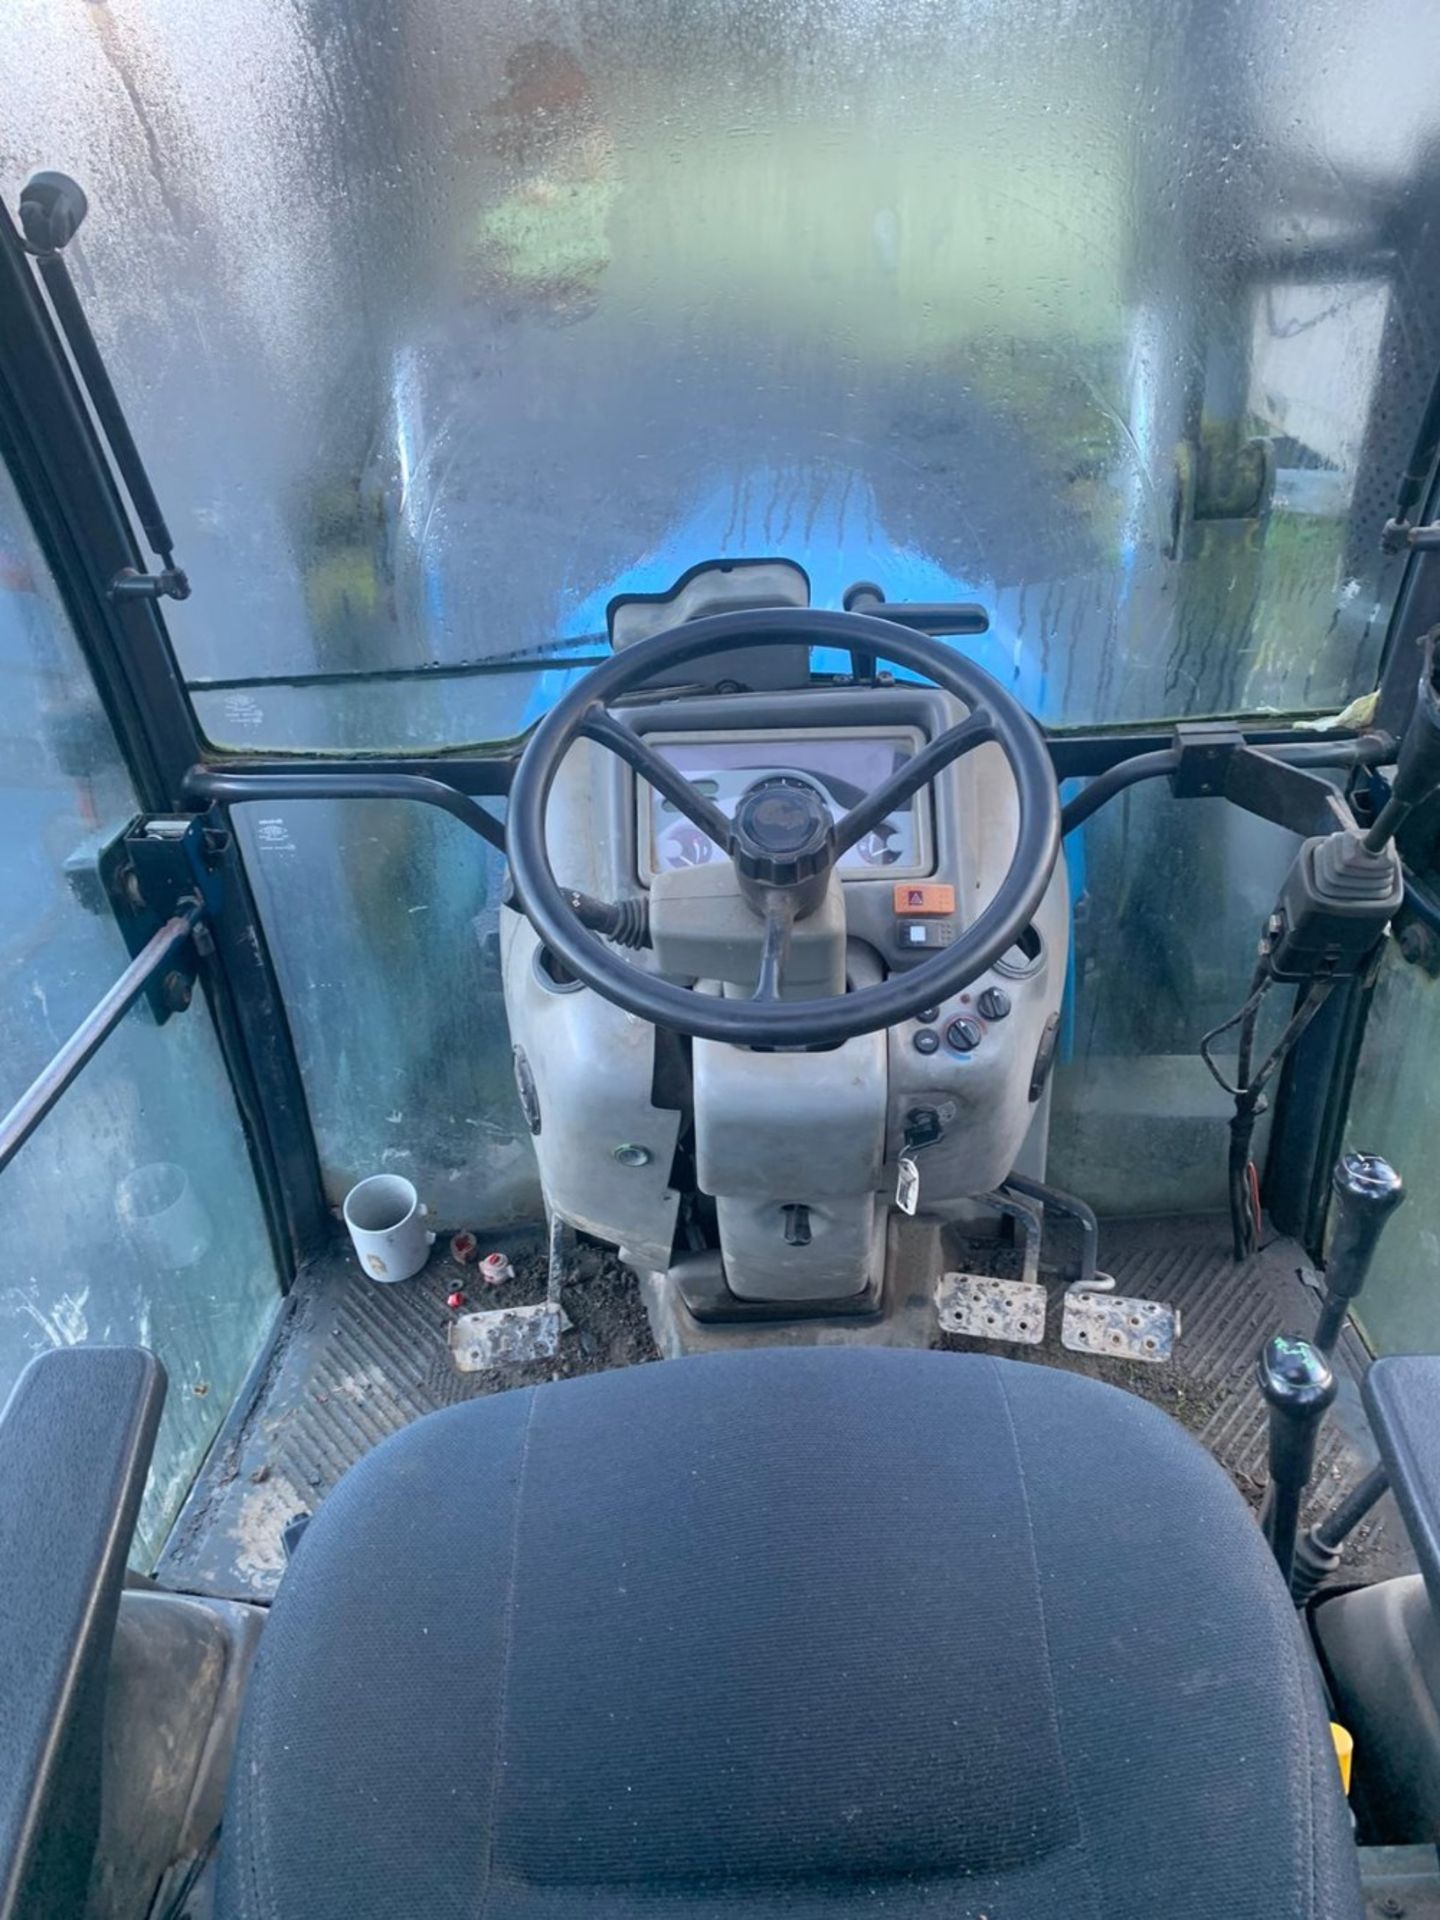 2000 LANDINI GHIBLI TRACTOR WITH LOADER . 5400 HOURS - Image 7 of 10